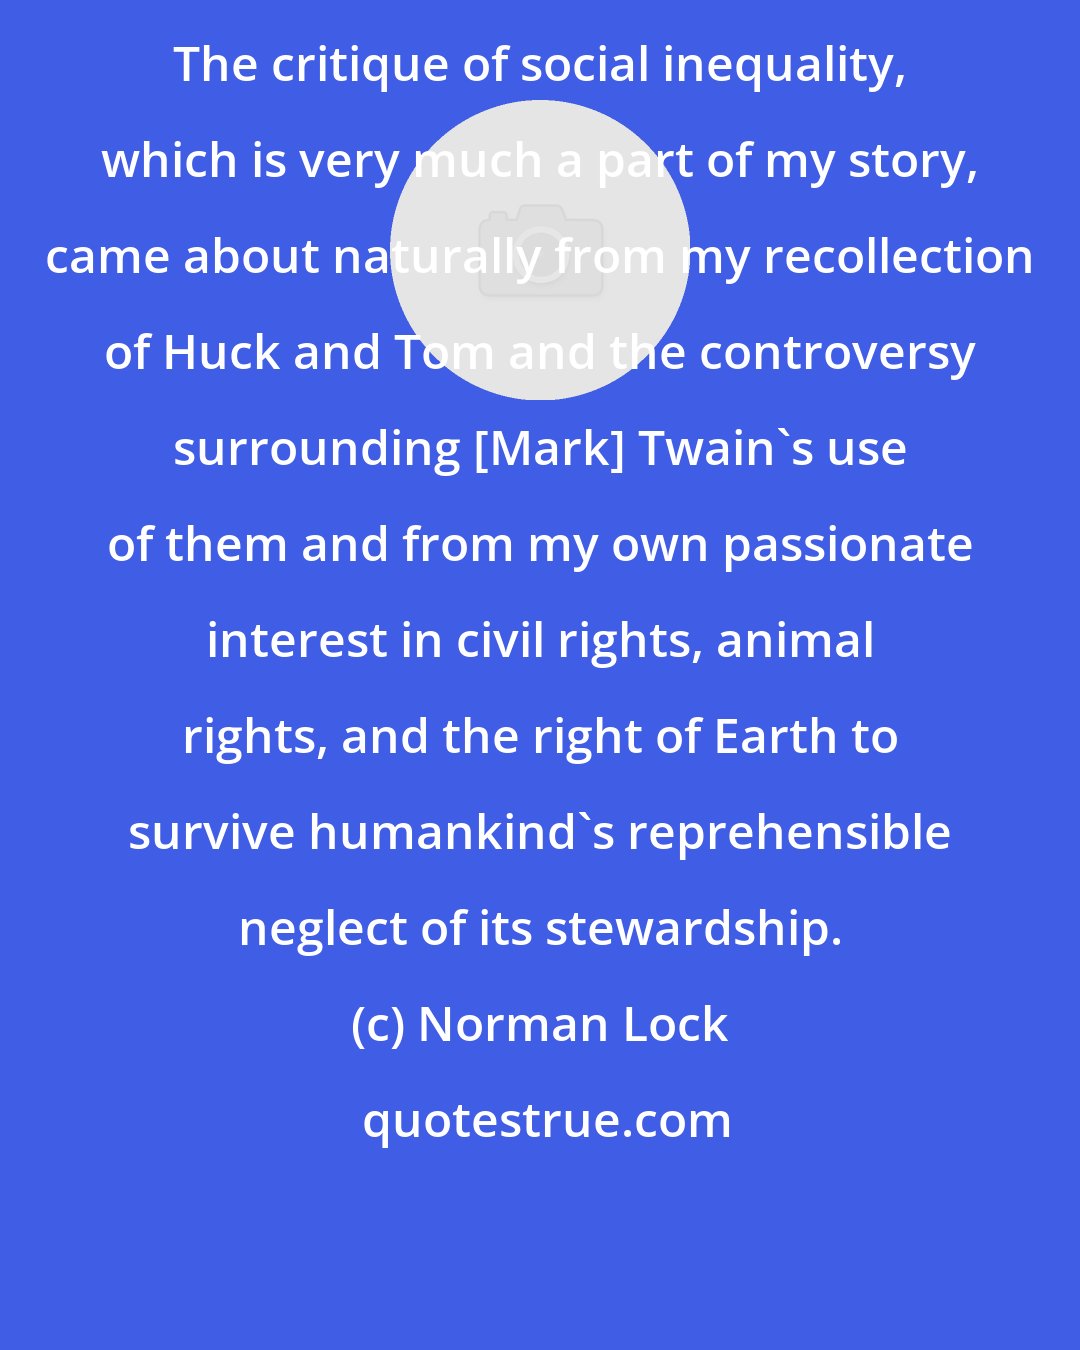 Norman Lock: The critique of social inequality, which is very much a part of my story, came about naturally from my recollection of Huck and Tom and the controversy surrounding [Mark] Twain's use of them and from my own passionate interest in civil rights, animal rights, and the right of Earth to survive humankind's reprehensible neglect of its stewardship.